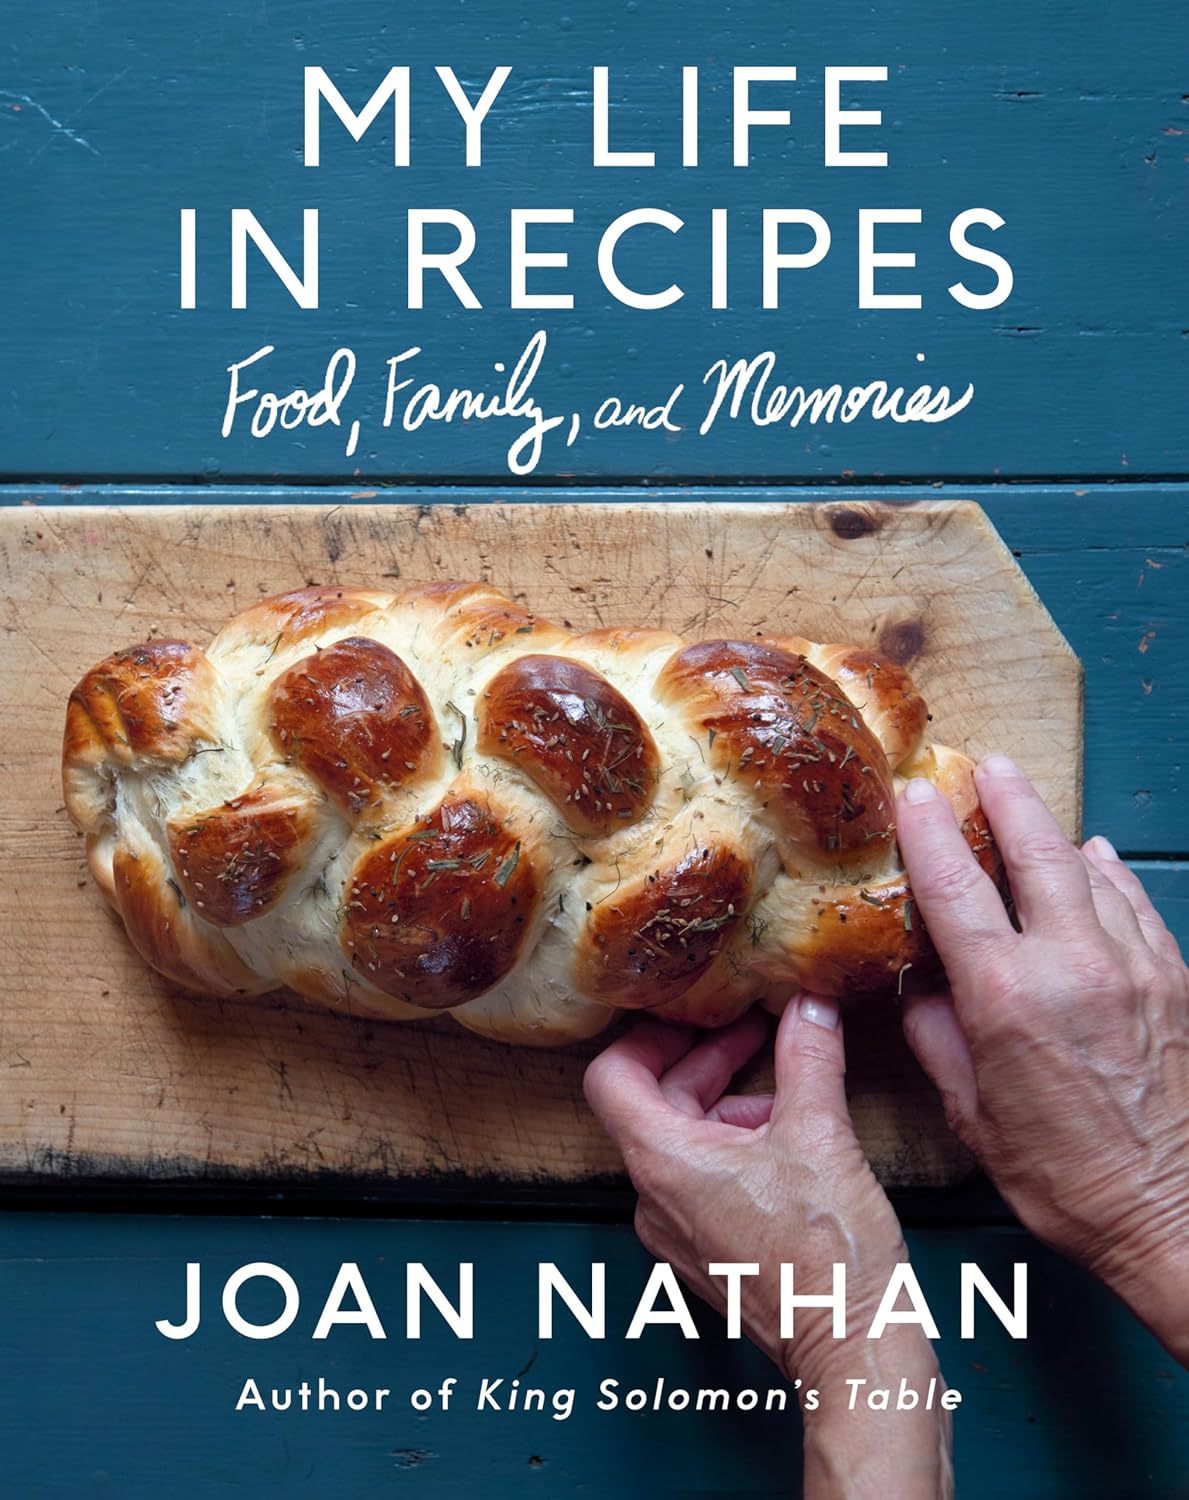 My Life in Recipes: Food, Family, and Memories (Joan Nathan) *Signed*